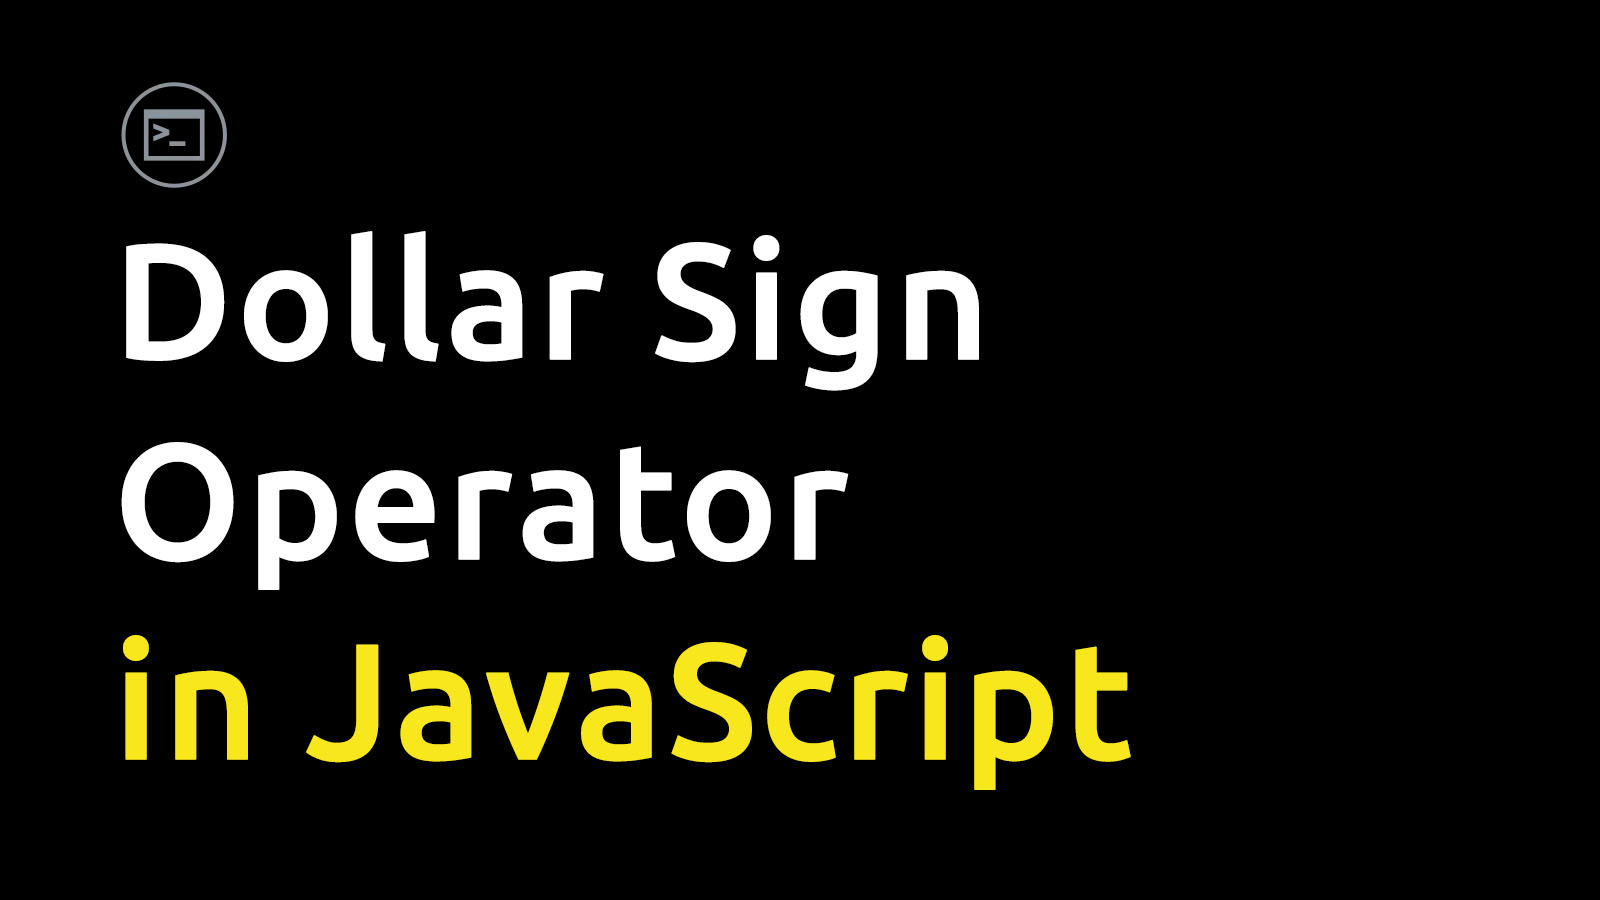 Dollar Sign Operator in JavaScript – What does $ mean in JS?